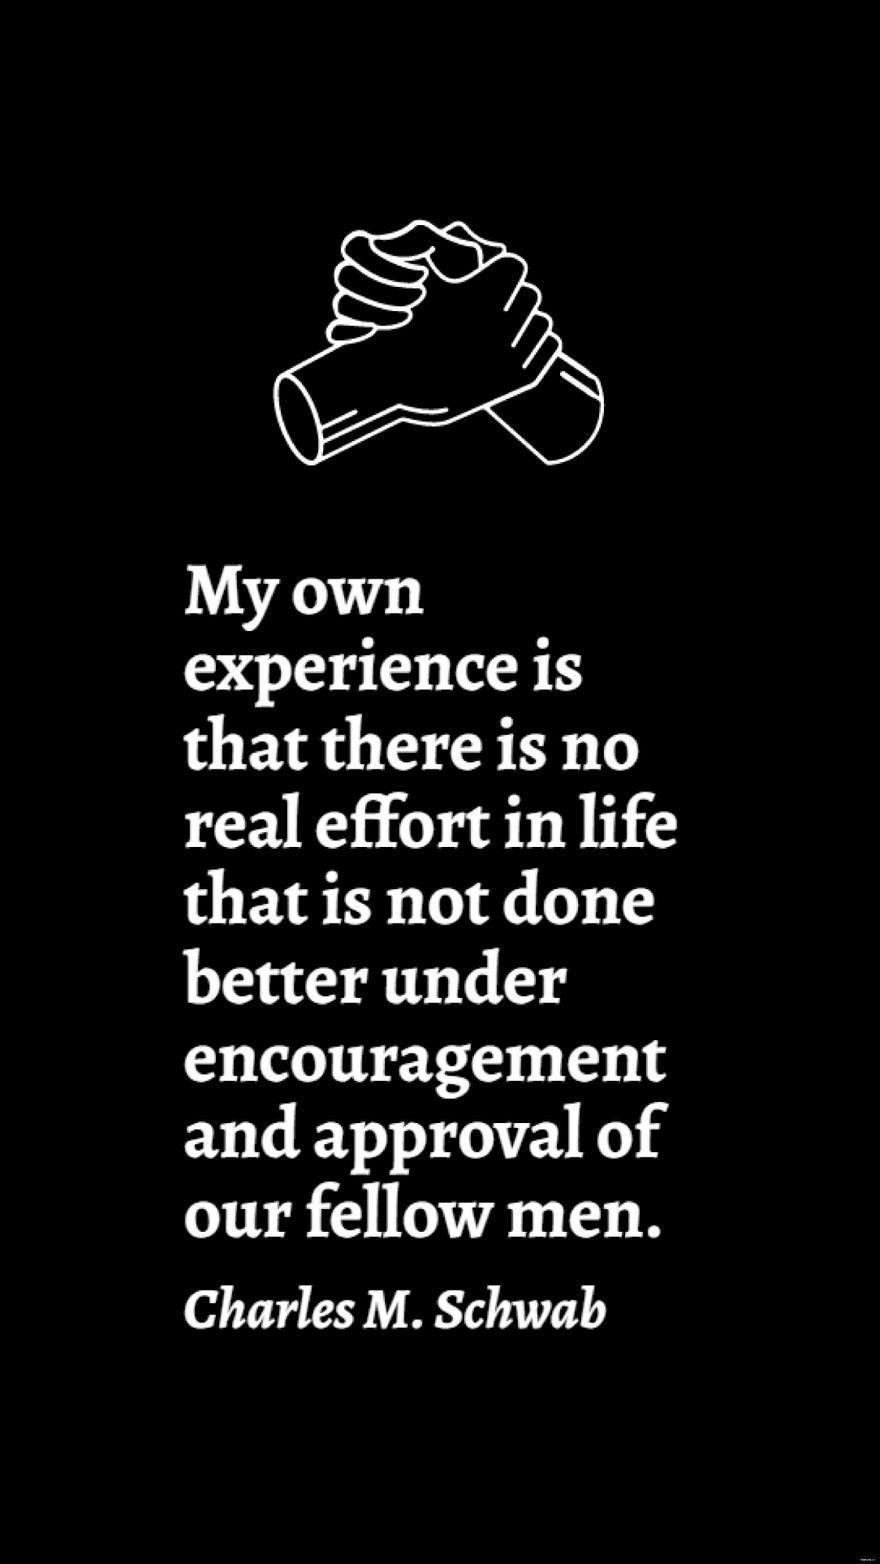 Charles M. Schwab - My own experience is that there is no real effort in life that is not done better under encouragement and approval of our fellow men.